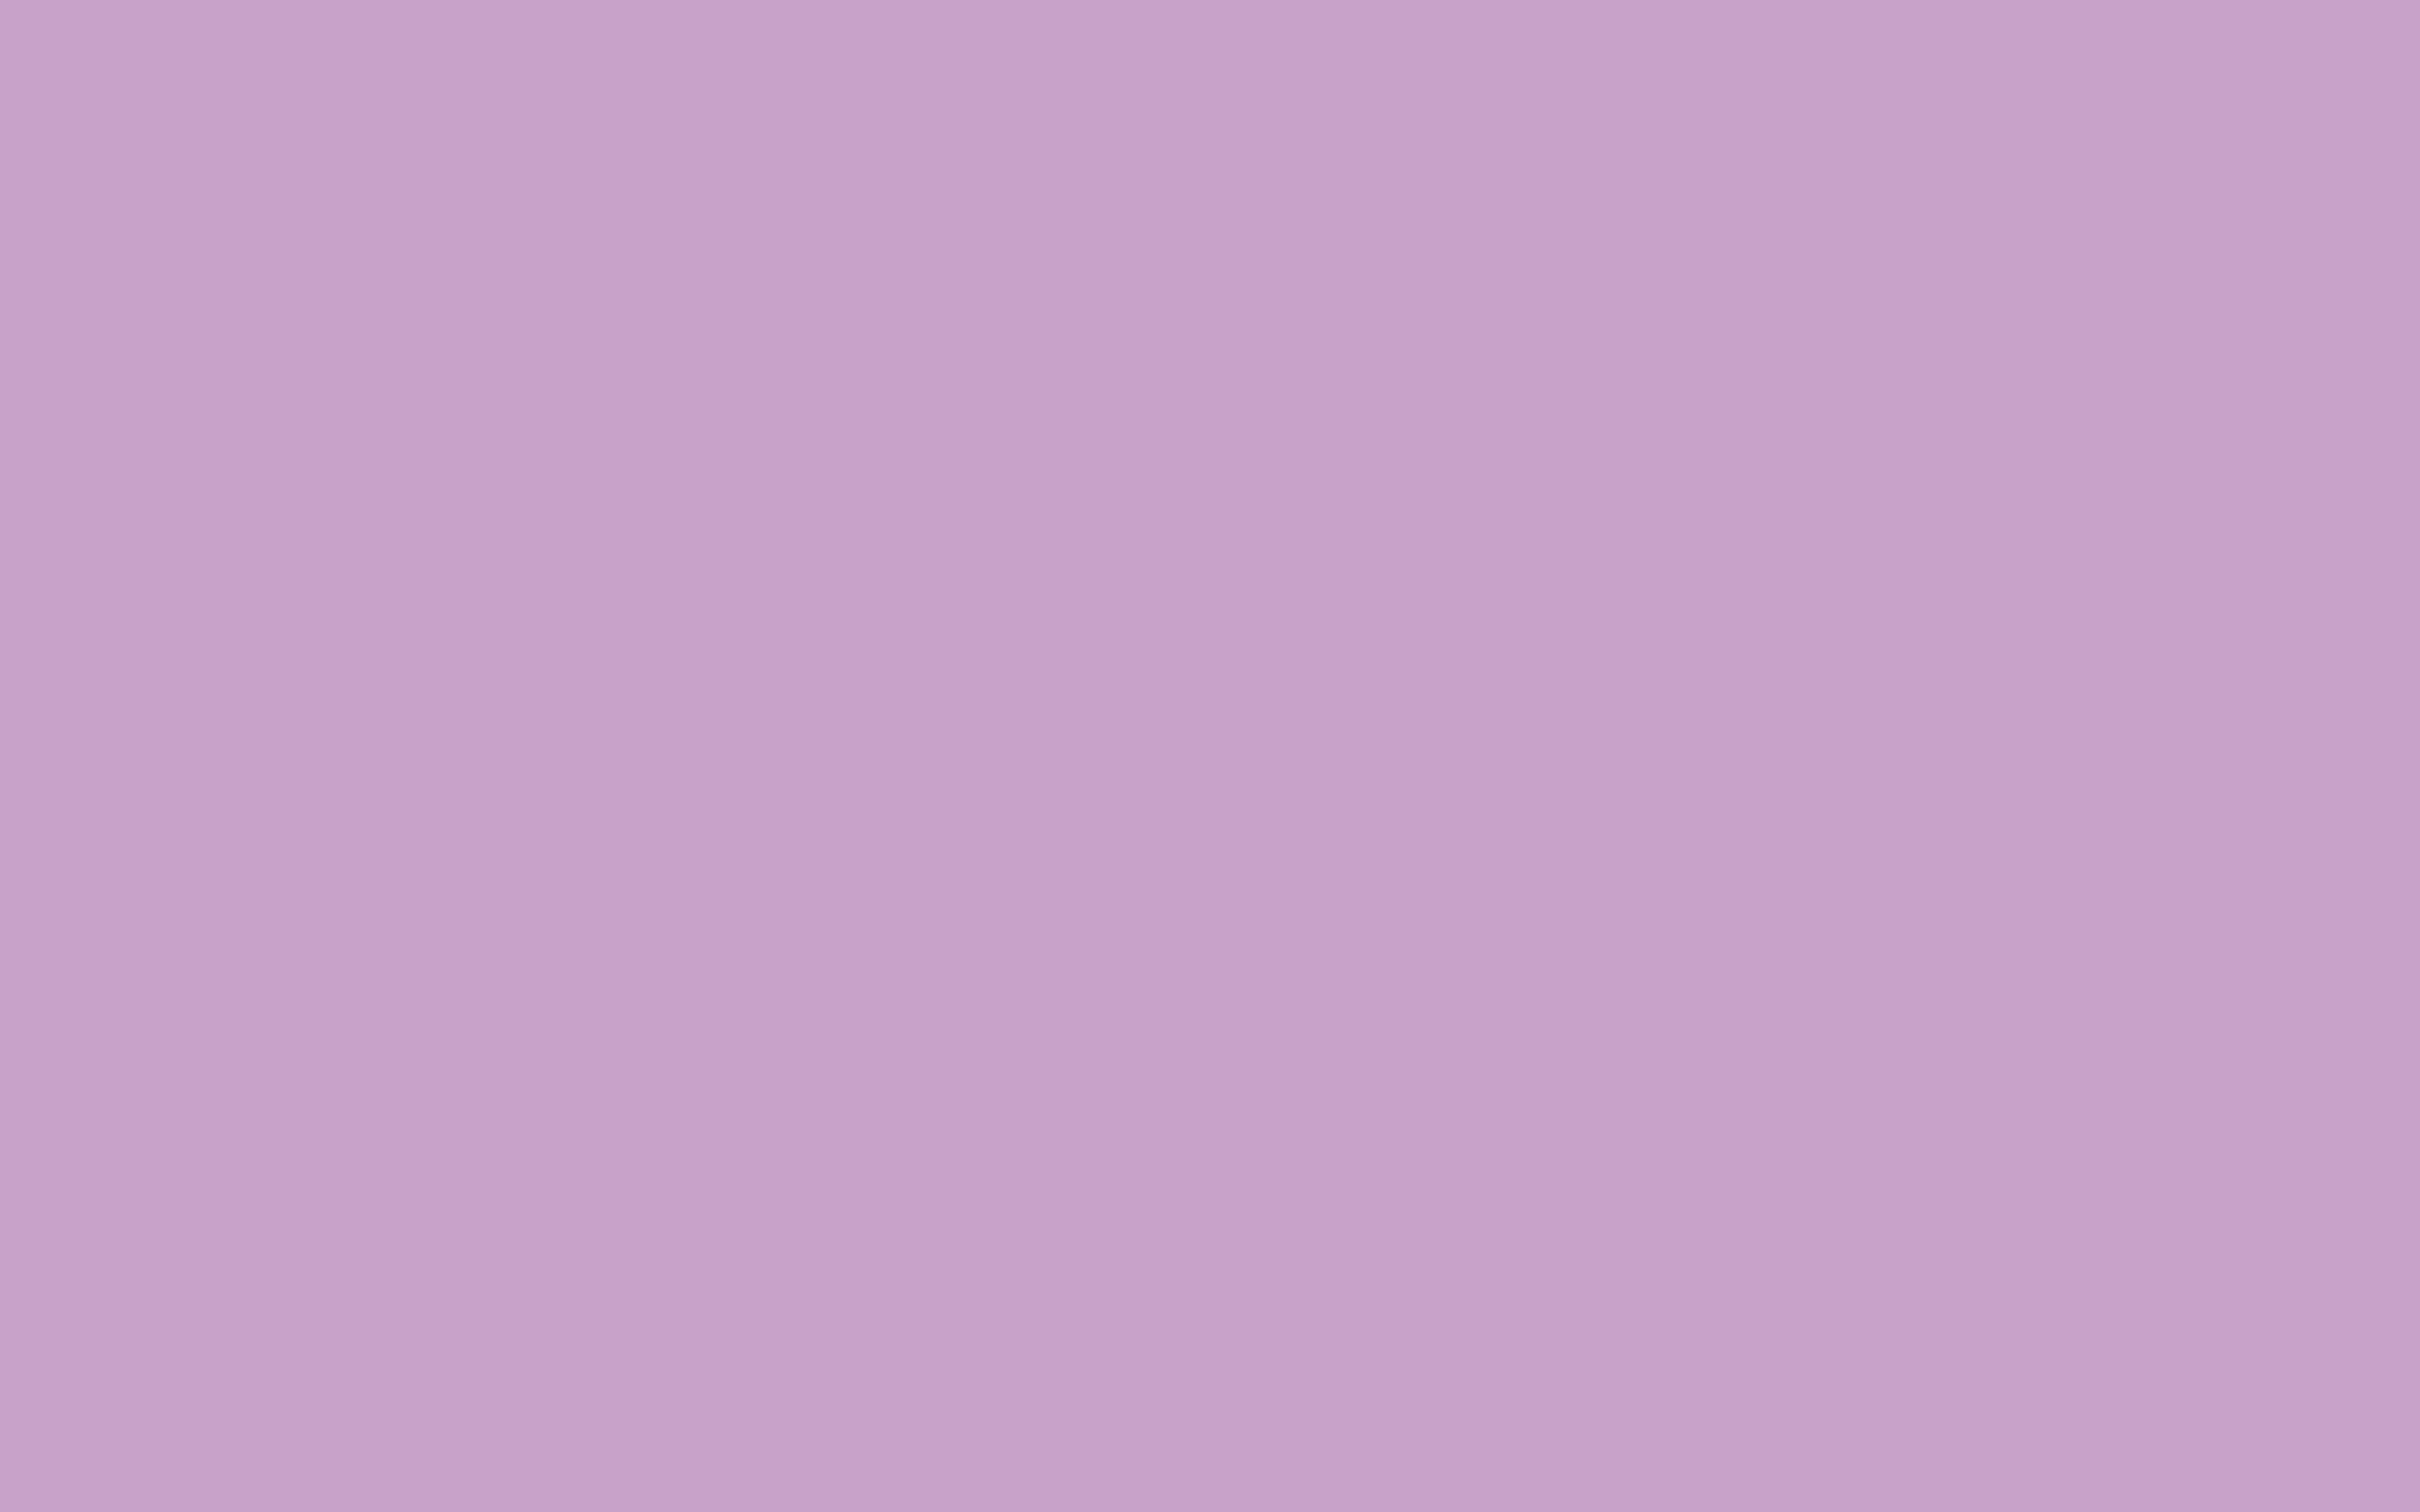 Free download Lilac Color Wallpaper 2560x1600 lilac solid color [2560x1600]  for your Desktop, Mobile & Tablet | Explore 77+ Lavender Color Wallpaper | Color  Wallpaper, Lavender Wallpaper, Lavender Background